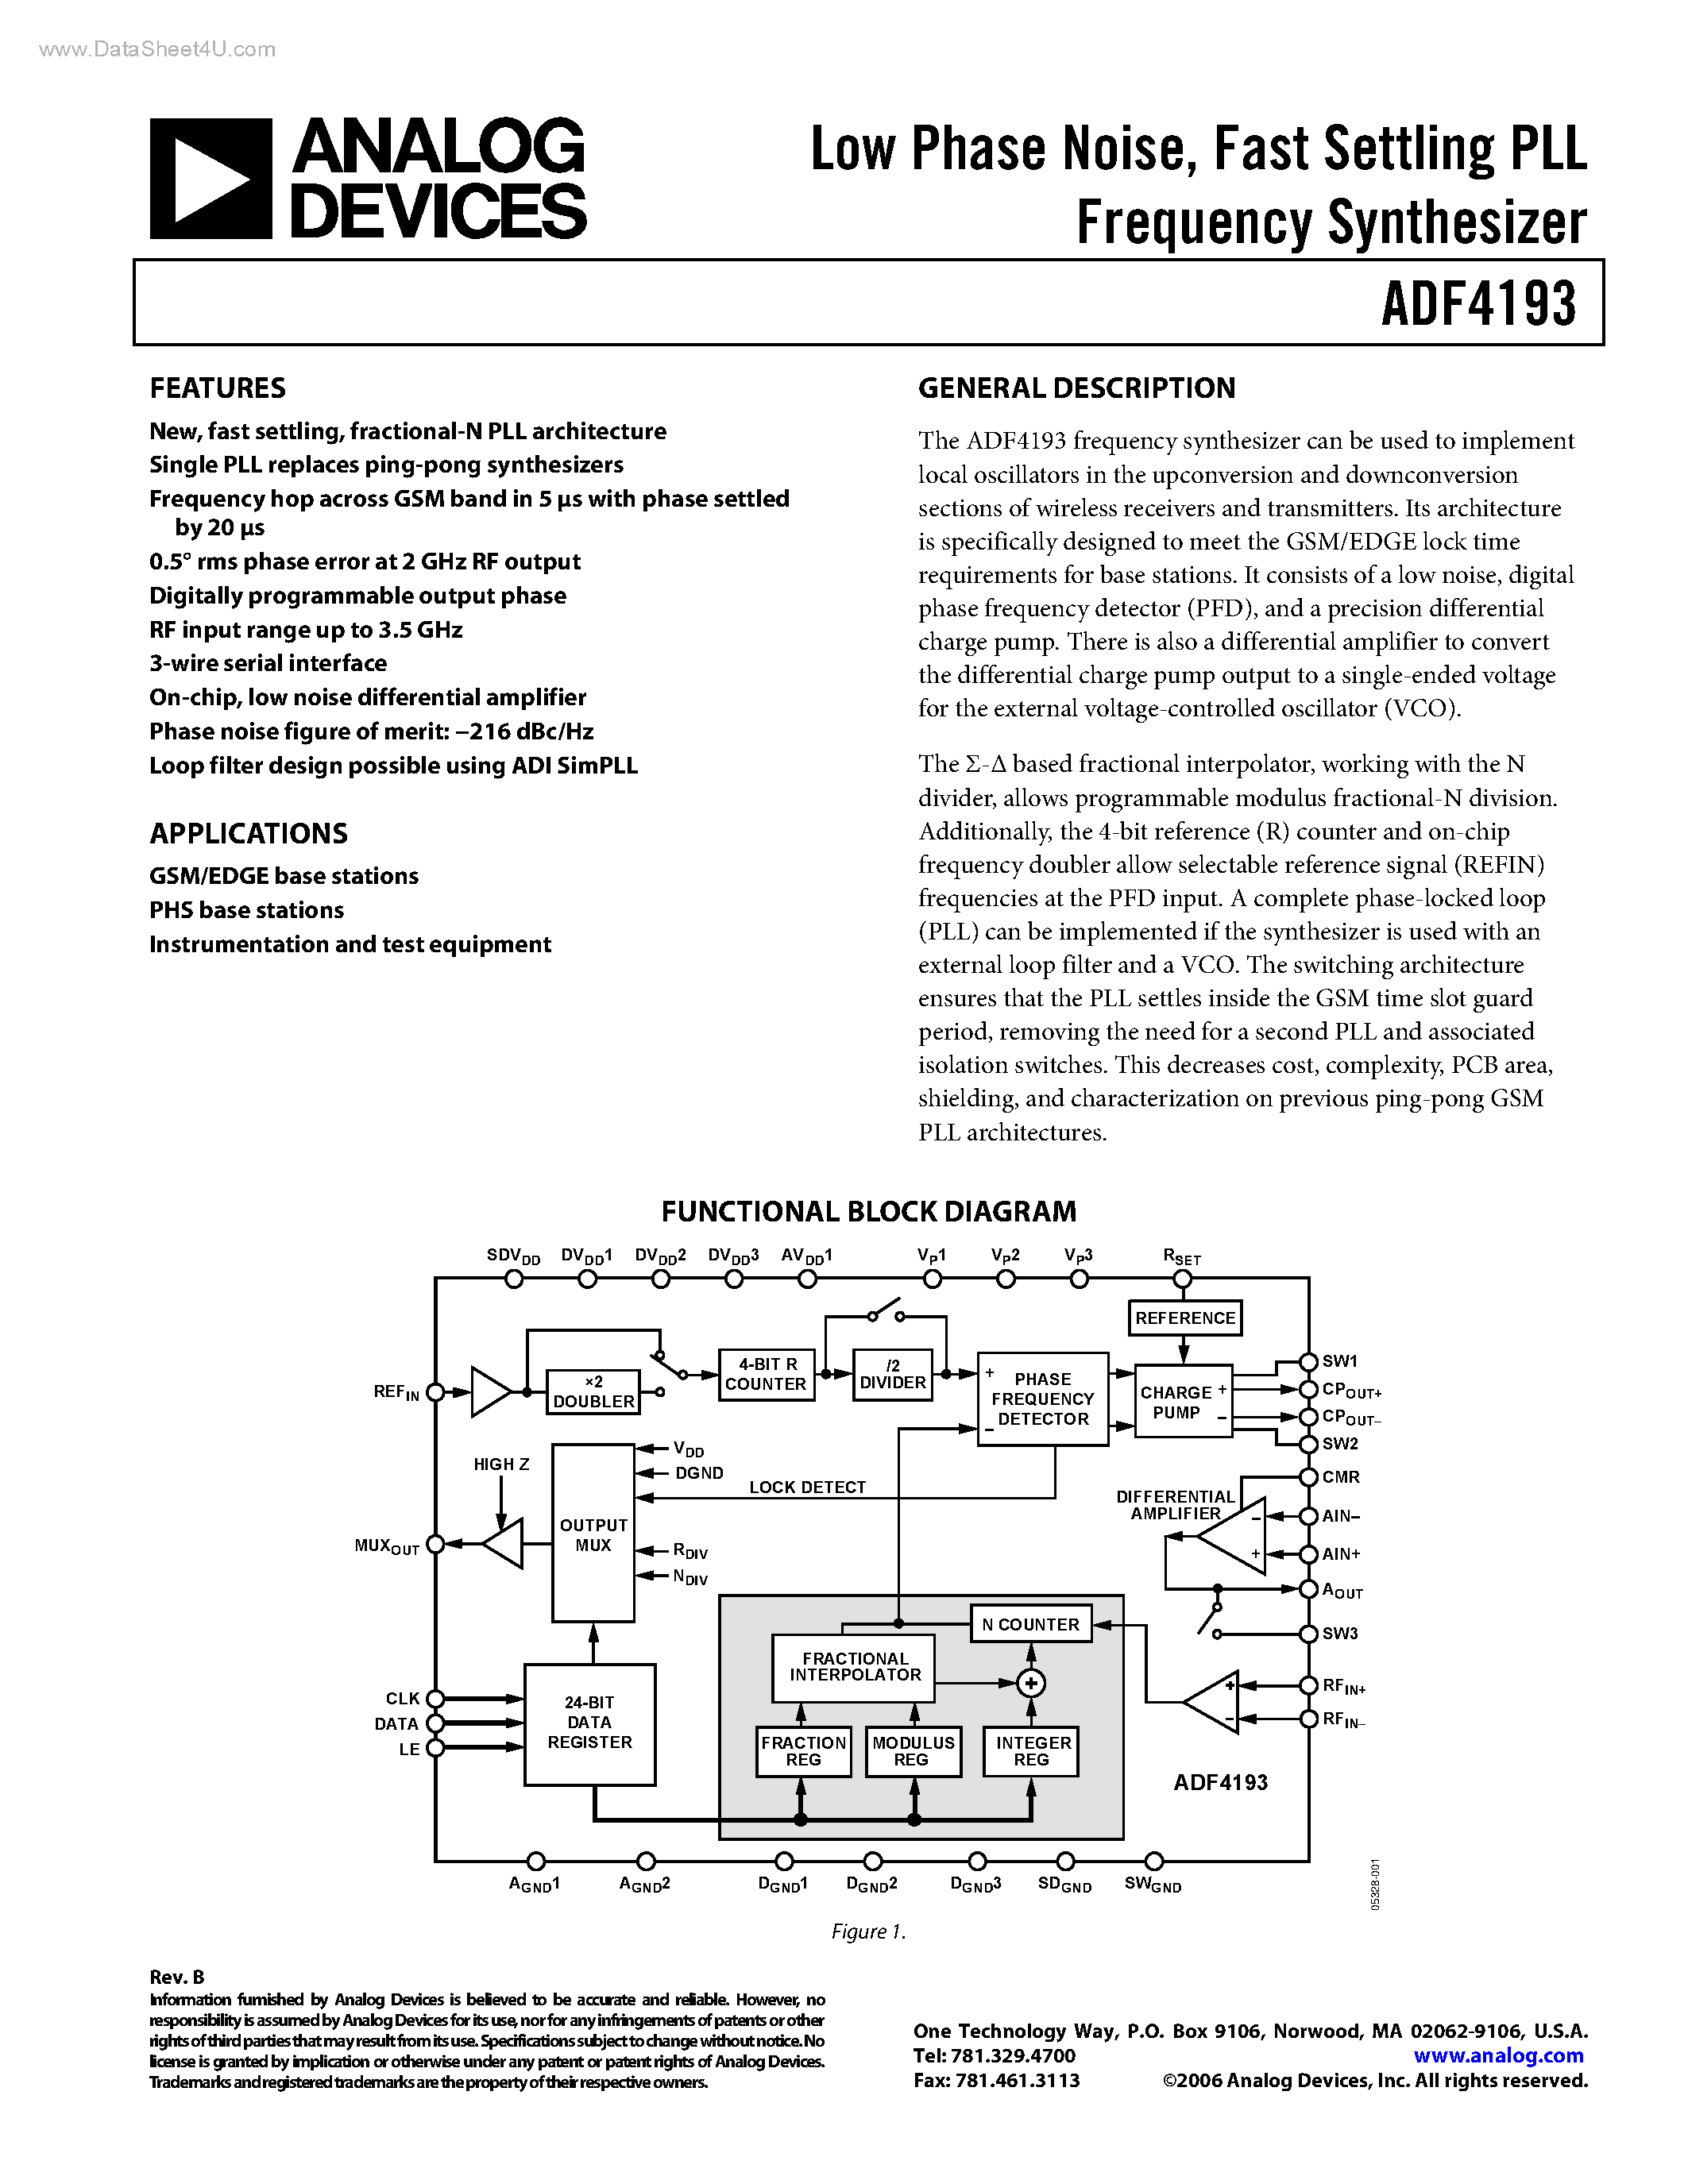 Datasheet ADF4193 - Fast Settling PLL Frequency Synthesizer page 1